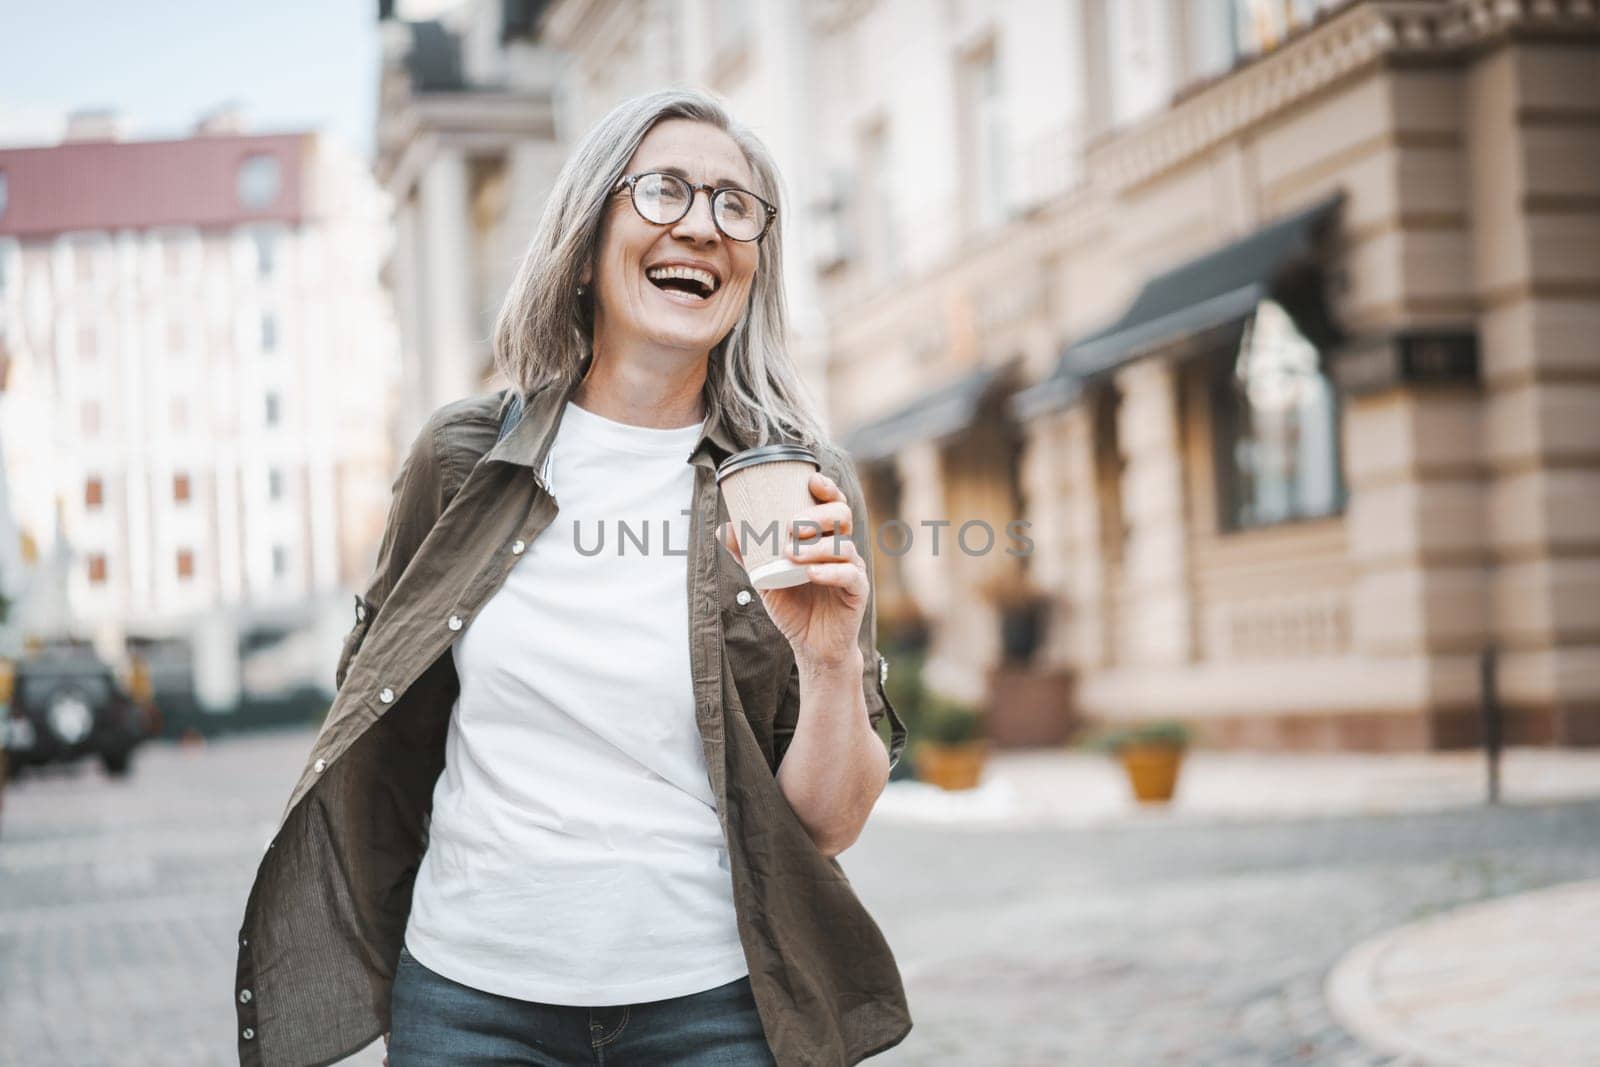 Concept of happy old age through image of silver-haired mature senior woman walking in city, enjoying cup of coffee. Woman is captured in moment of joy and contentment, with smile and positive mood. . High quality photo